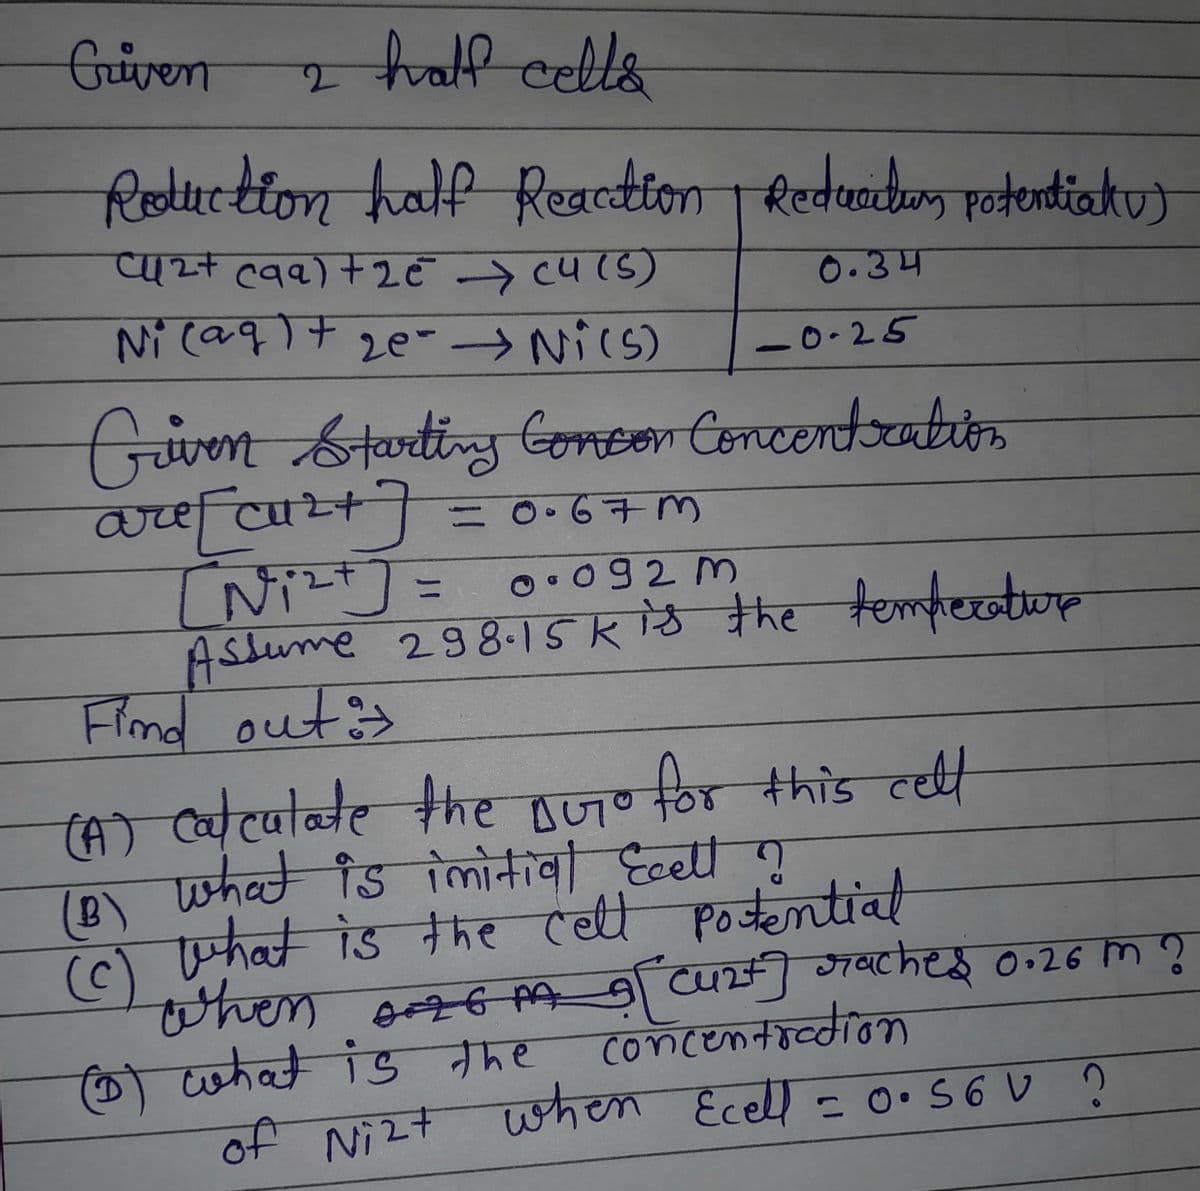 Griven
2 half cells
Reduction half Reaction | Reducitum potentialu)
Cu2+ c9a) +25 (4(5)
0.34
Ni (aq) + 2e - →Ni(s)
0.25
Griven Starting Consor Concentration
are [cu²+] = 0.67m
[Ni²+] =
0.092 m
Assume 298.15k is the temperature
Find out =
(A) calculate the Buro for this cell
(B) what is initial Ecell ?
(c)
what is the cell potential
when AGMA 9 [ Cu2+] saches 0.26 m ?
concentration
(1) what is the
of Nizt when Ecell = 0.56V ?